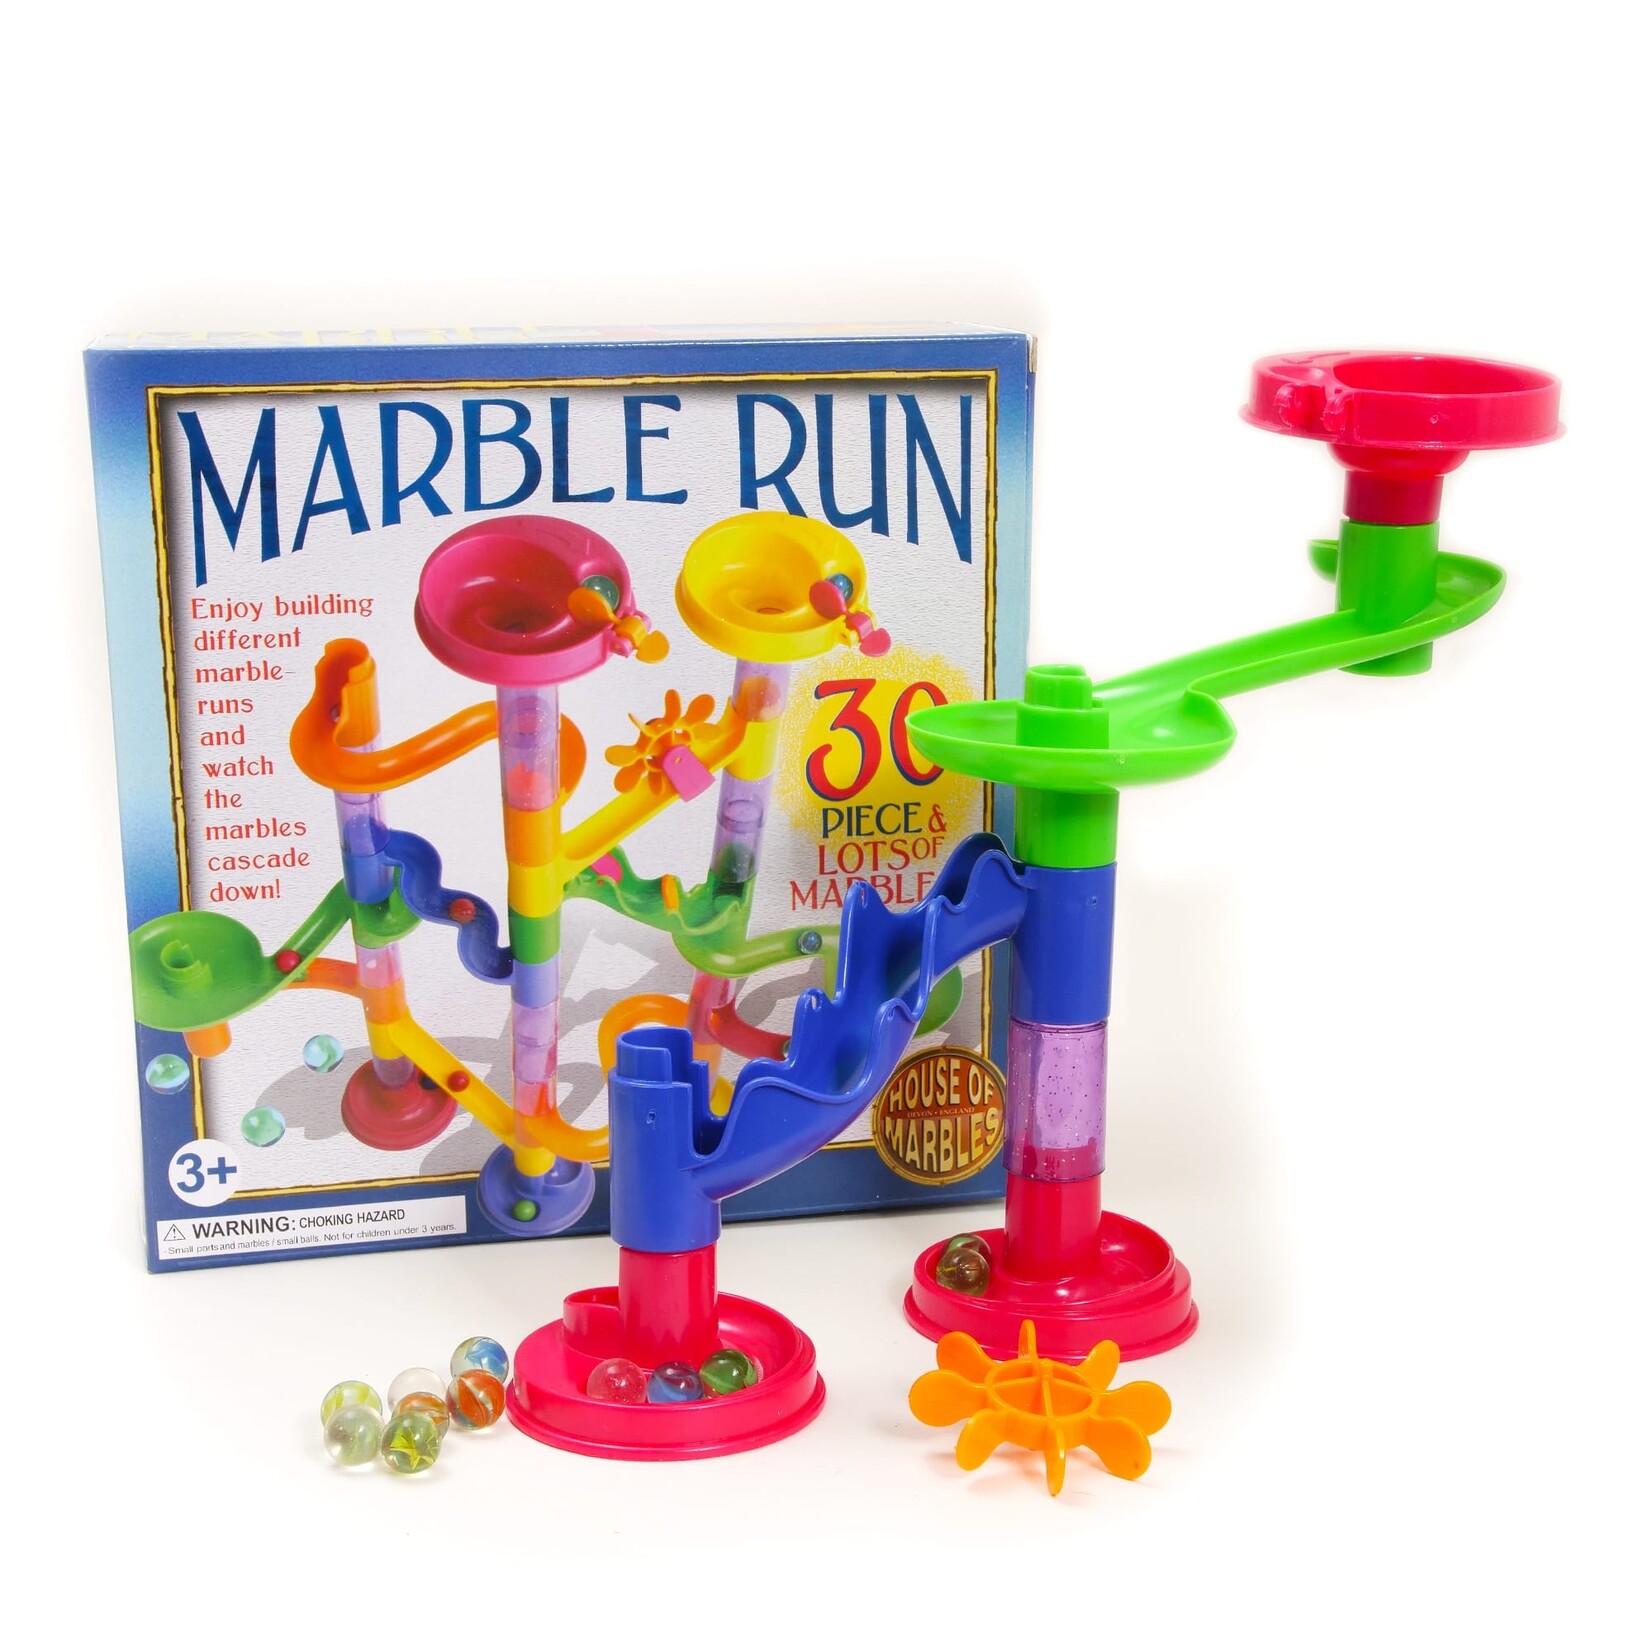 House of Marbles 30 Piece Marble Run